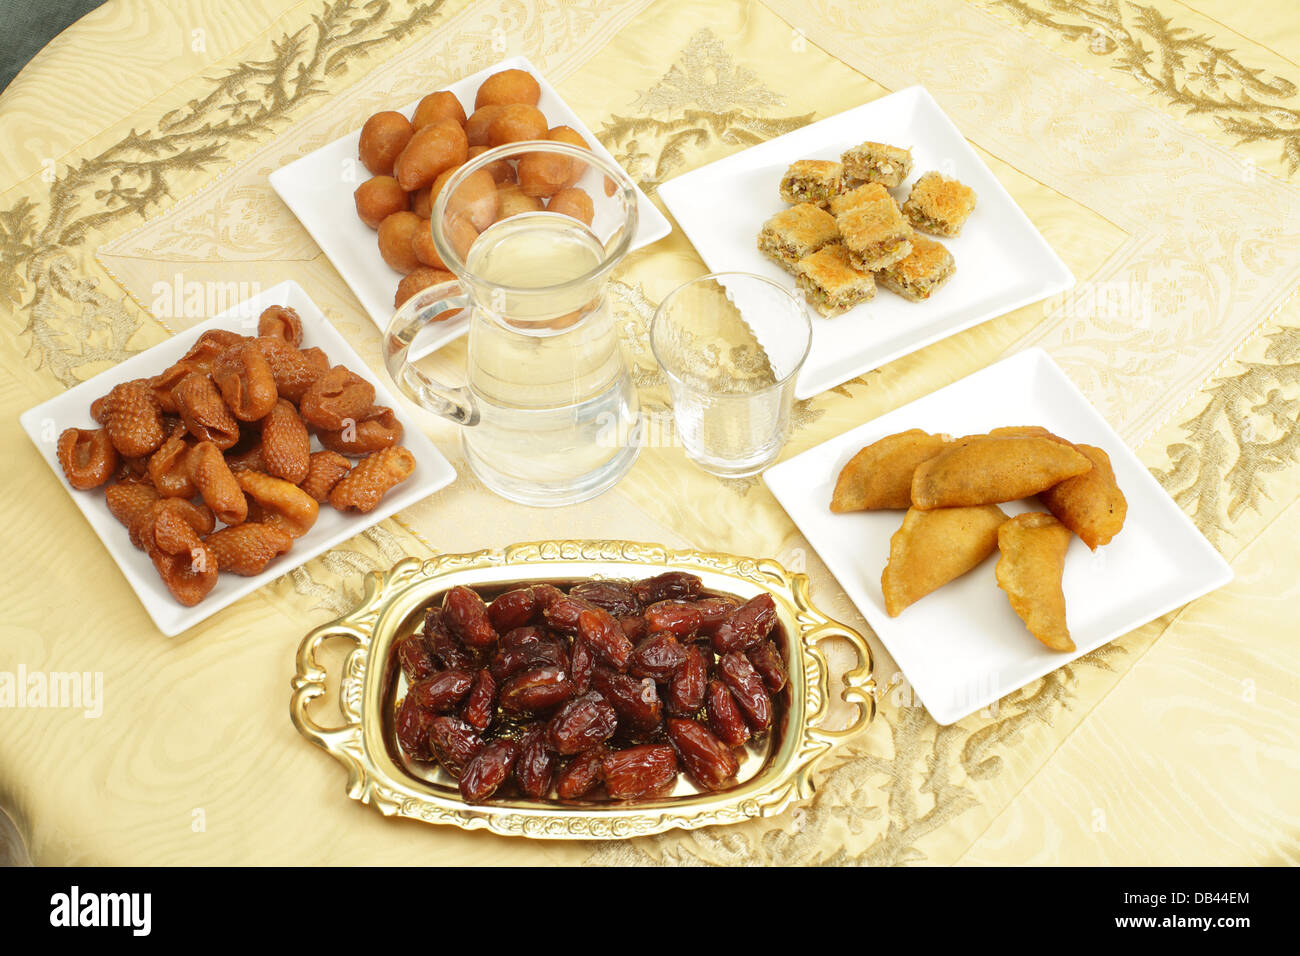 A table set for Iftar, the fast-breaking during the Muslim holy month of Ramadan, Stock Photo